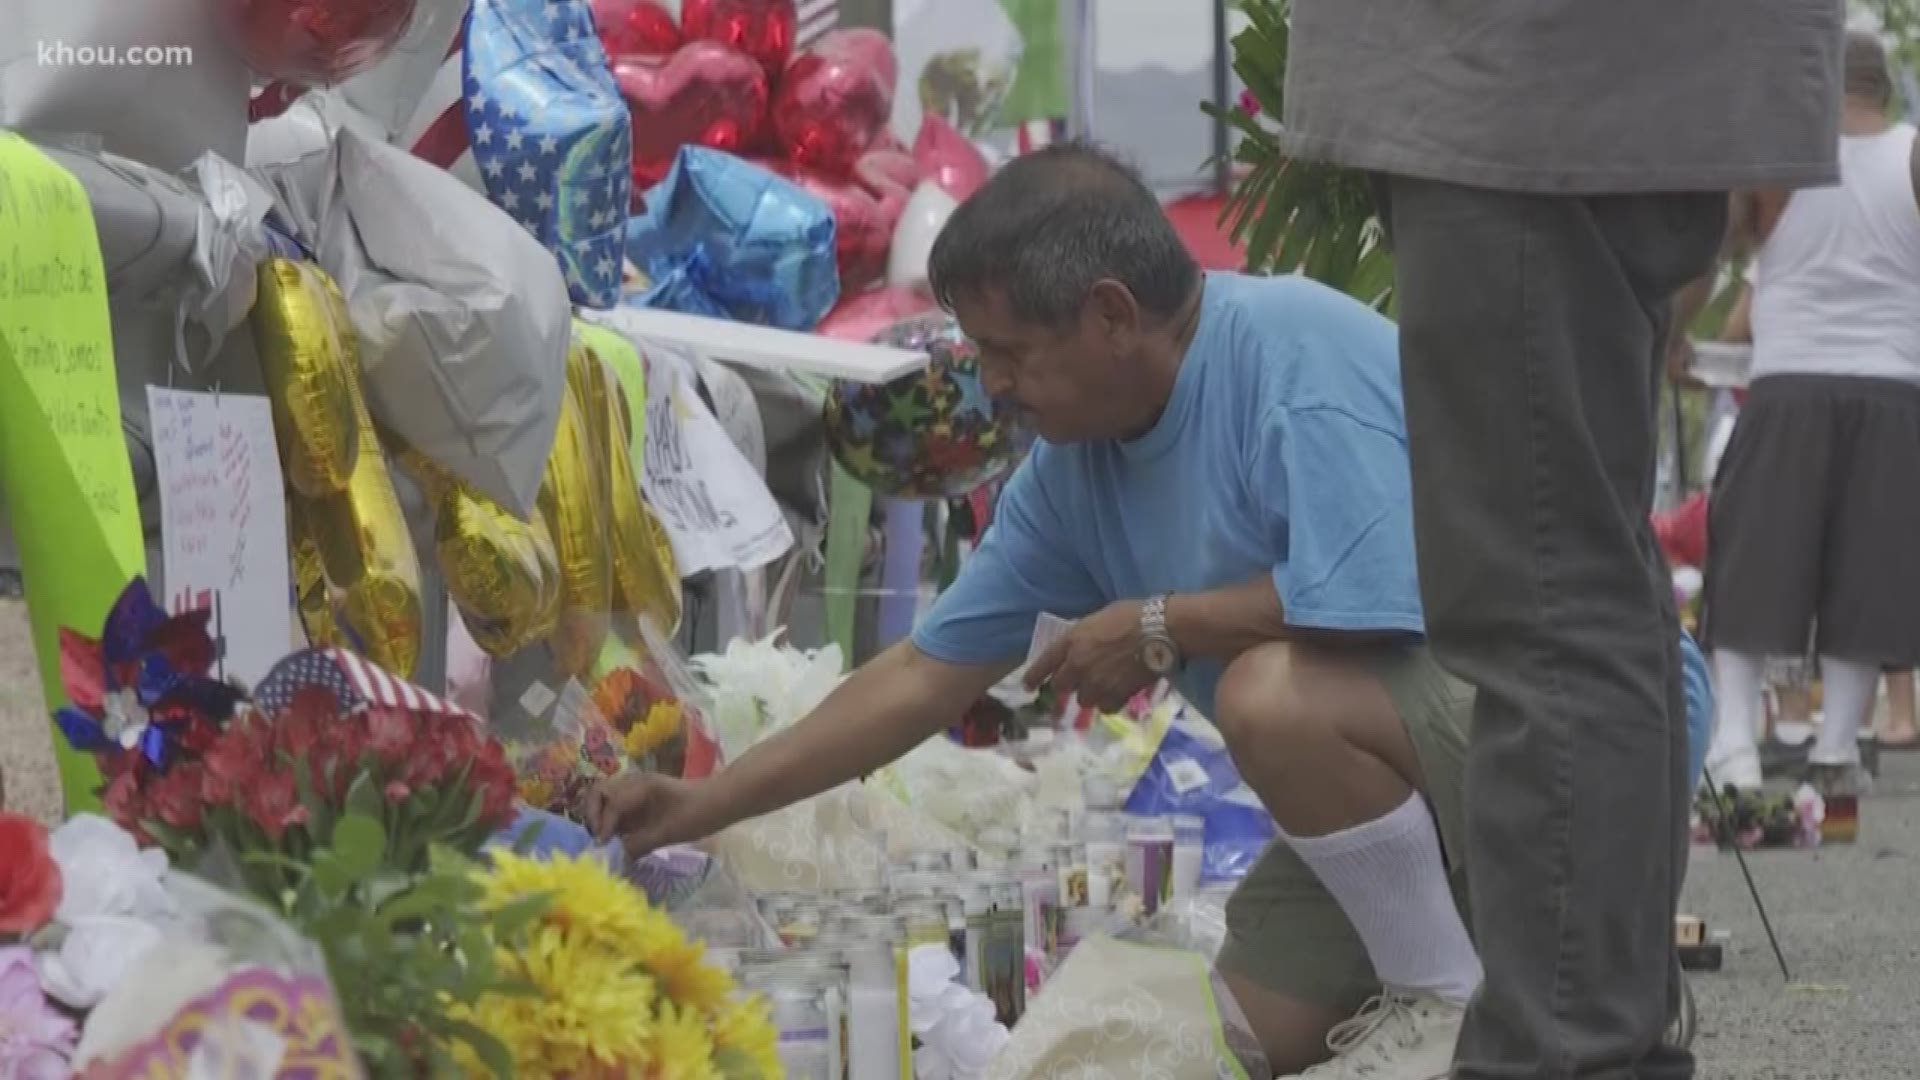 El Paso residents are mourning the loss of 22 people killed in Saturday's mass shooting, stopping by the site to pay their respects and try to heal.